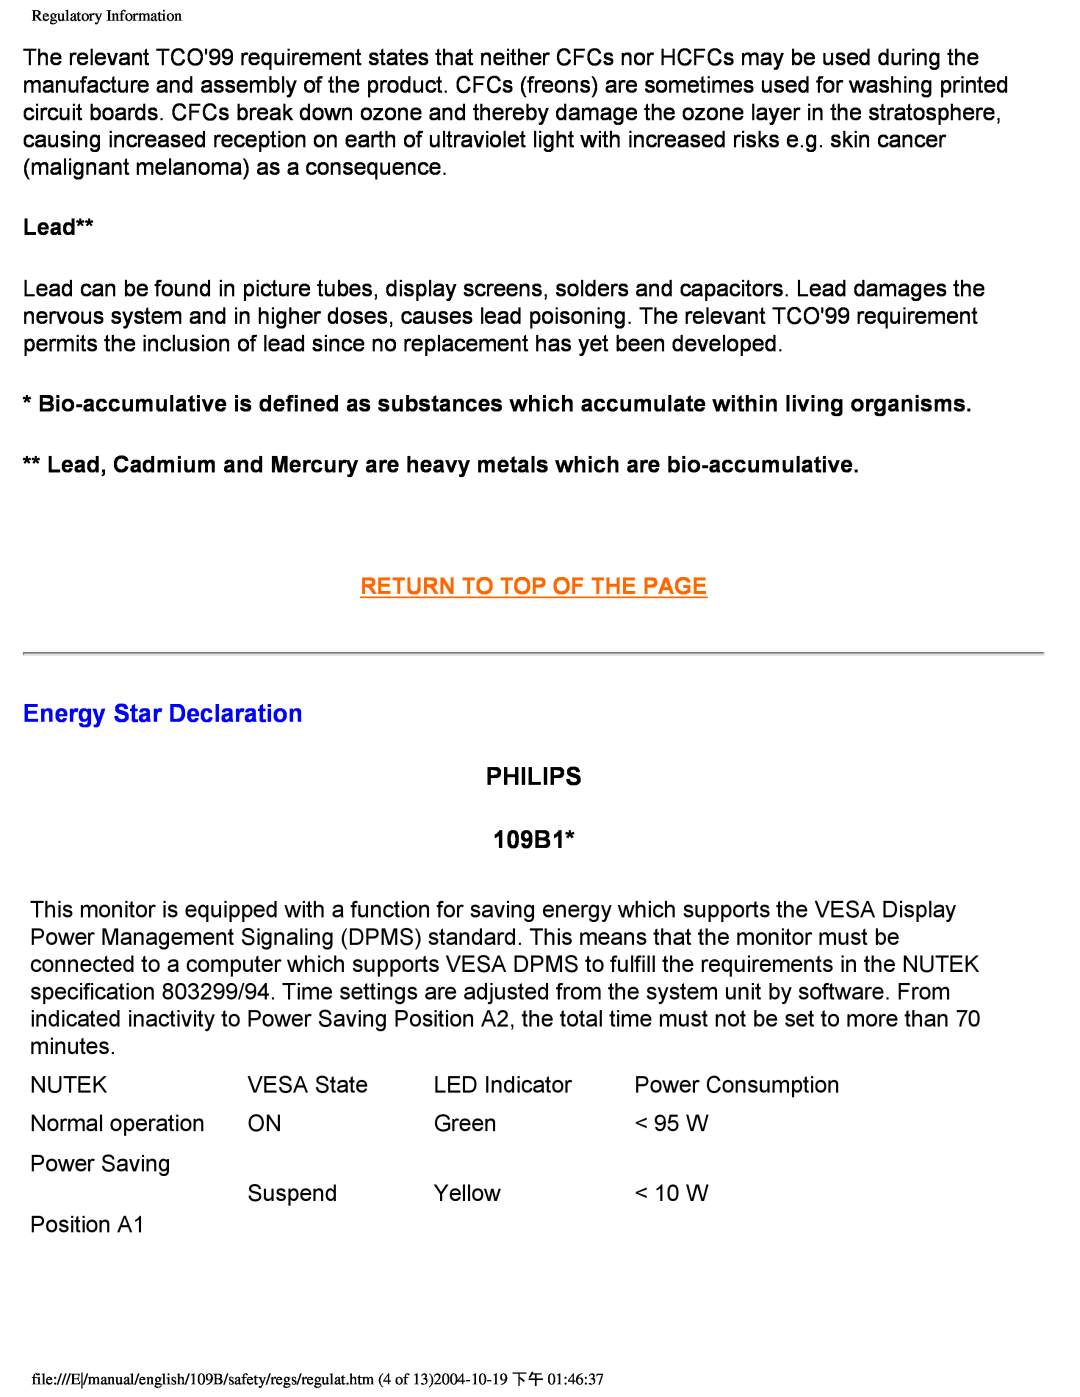 Philips user manual Energy Star Declaration, PHILIPS 109B1, Lead, Return To Top Of The Page 